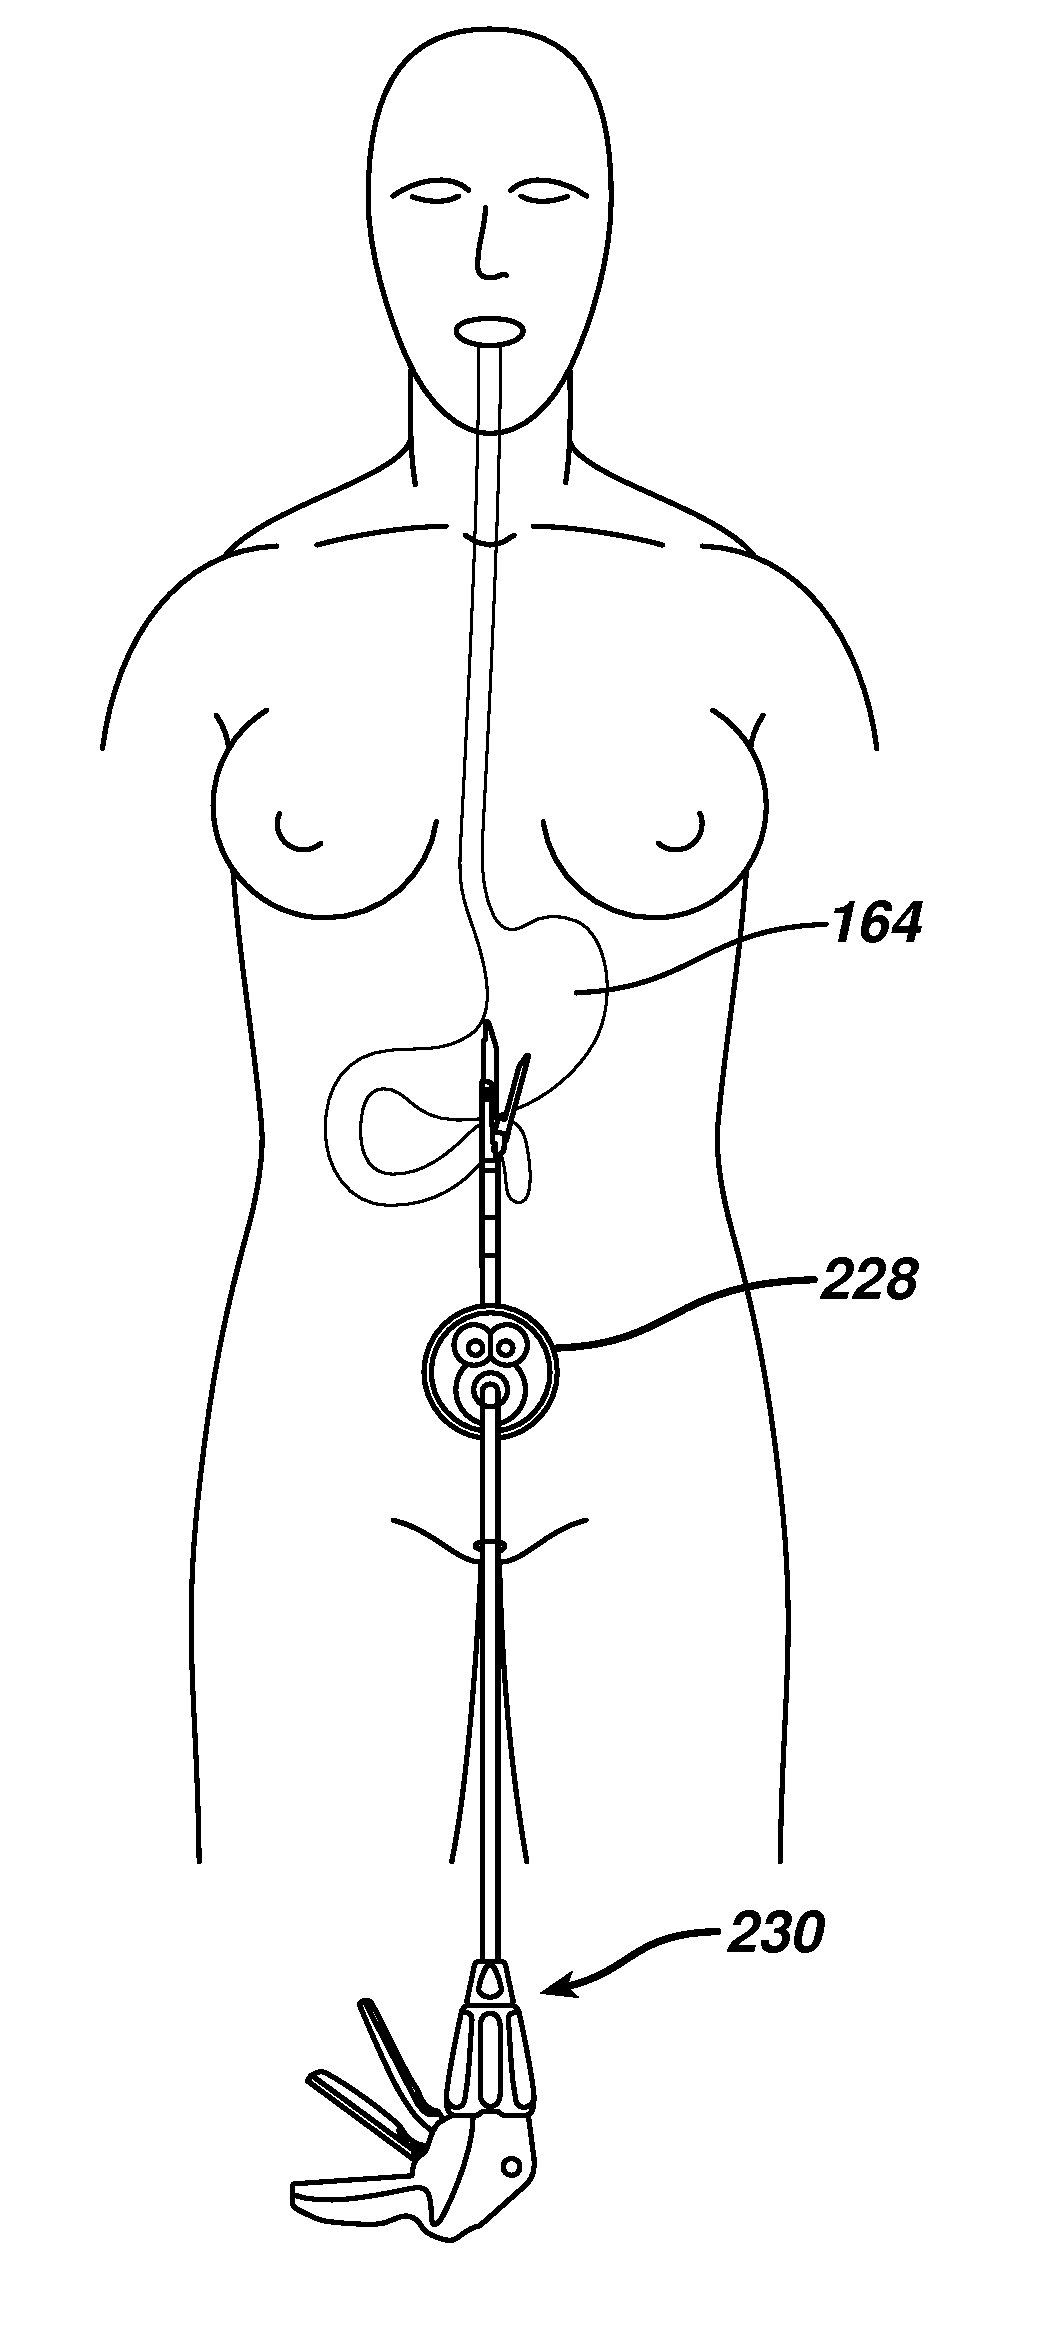 Methods and devices for performing gastrectomies and gastroplasties